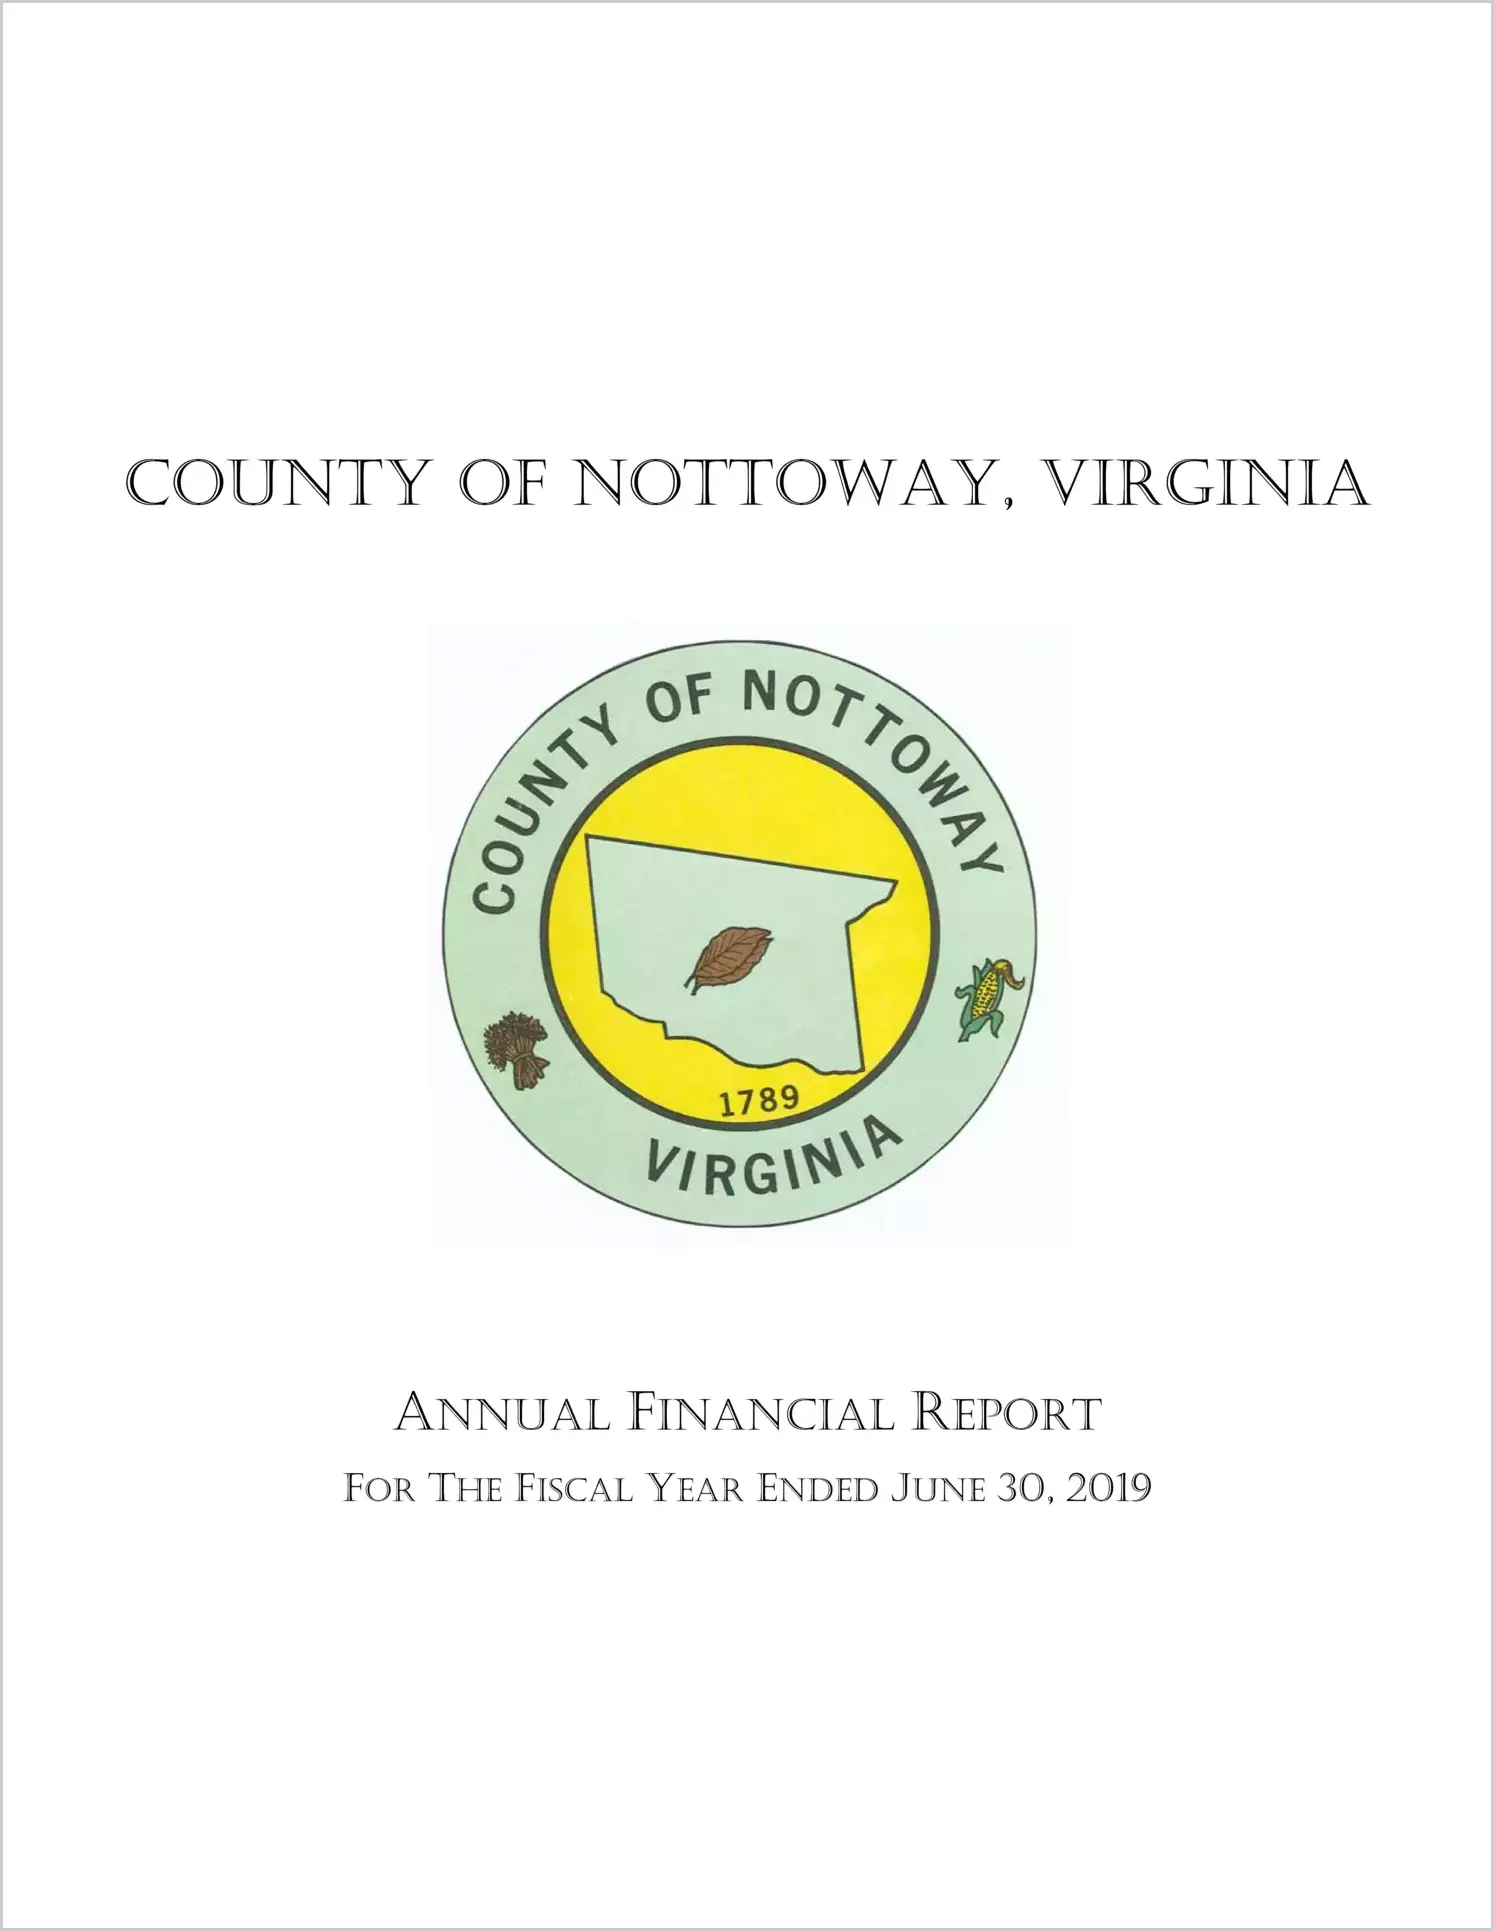 2019 Annual Financial Report for County of Nottoway